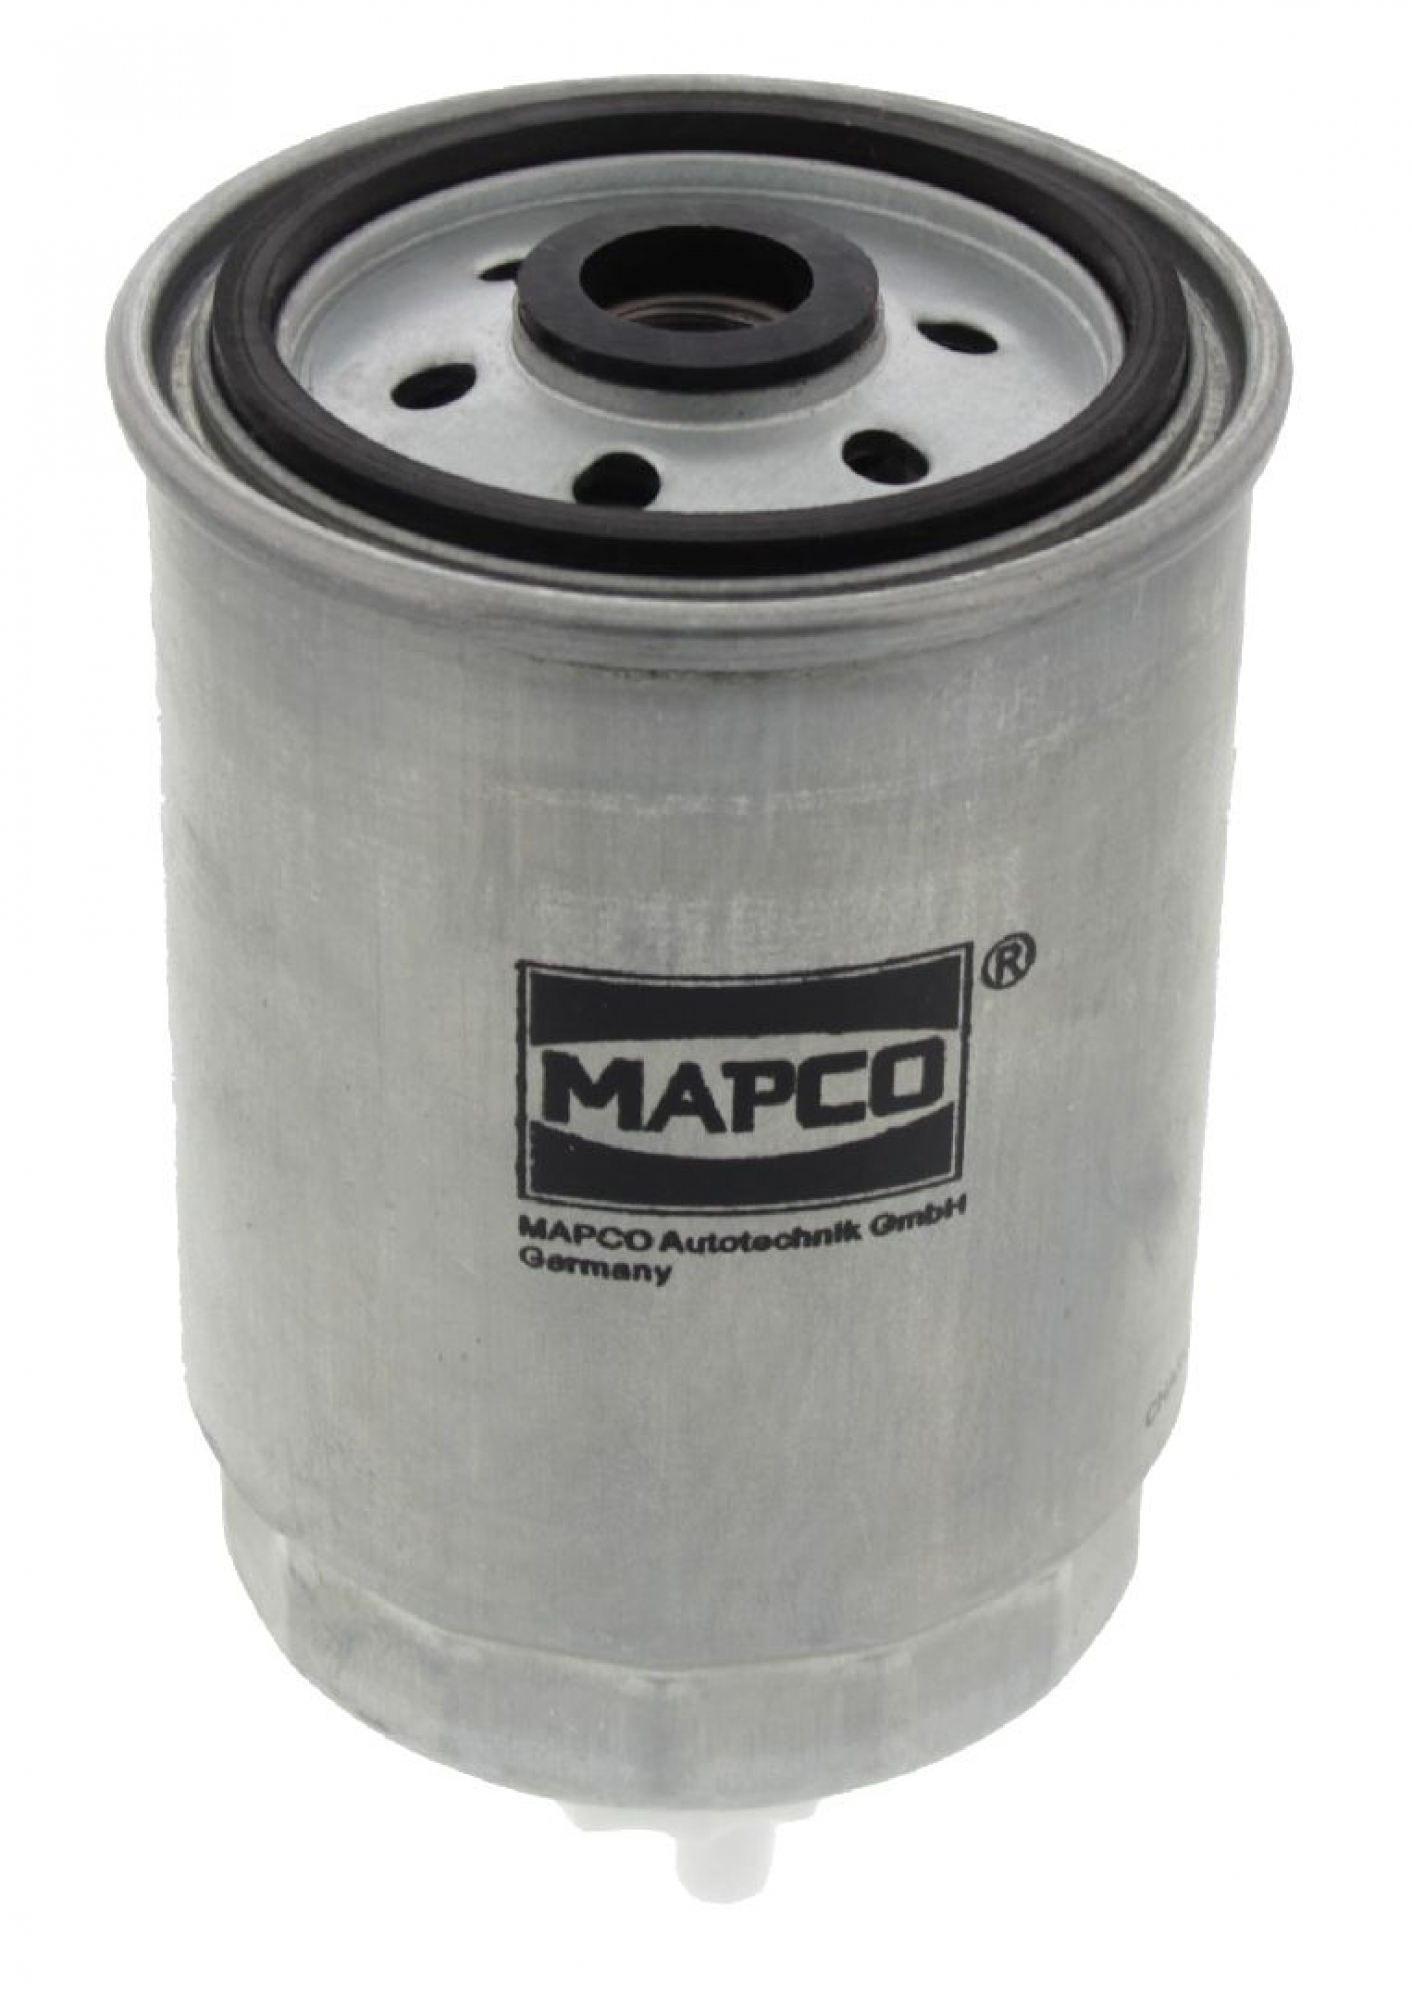 Mapco 63901 Spin-on fuel filter 63901